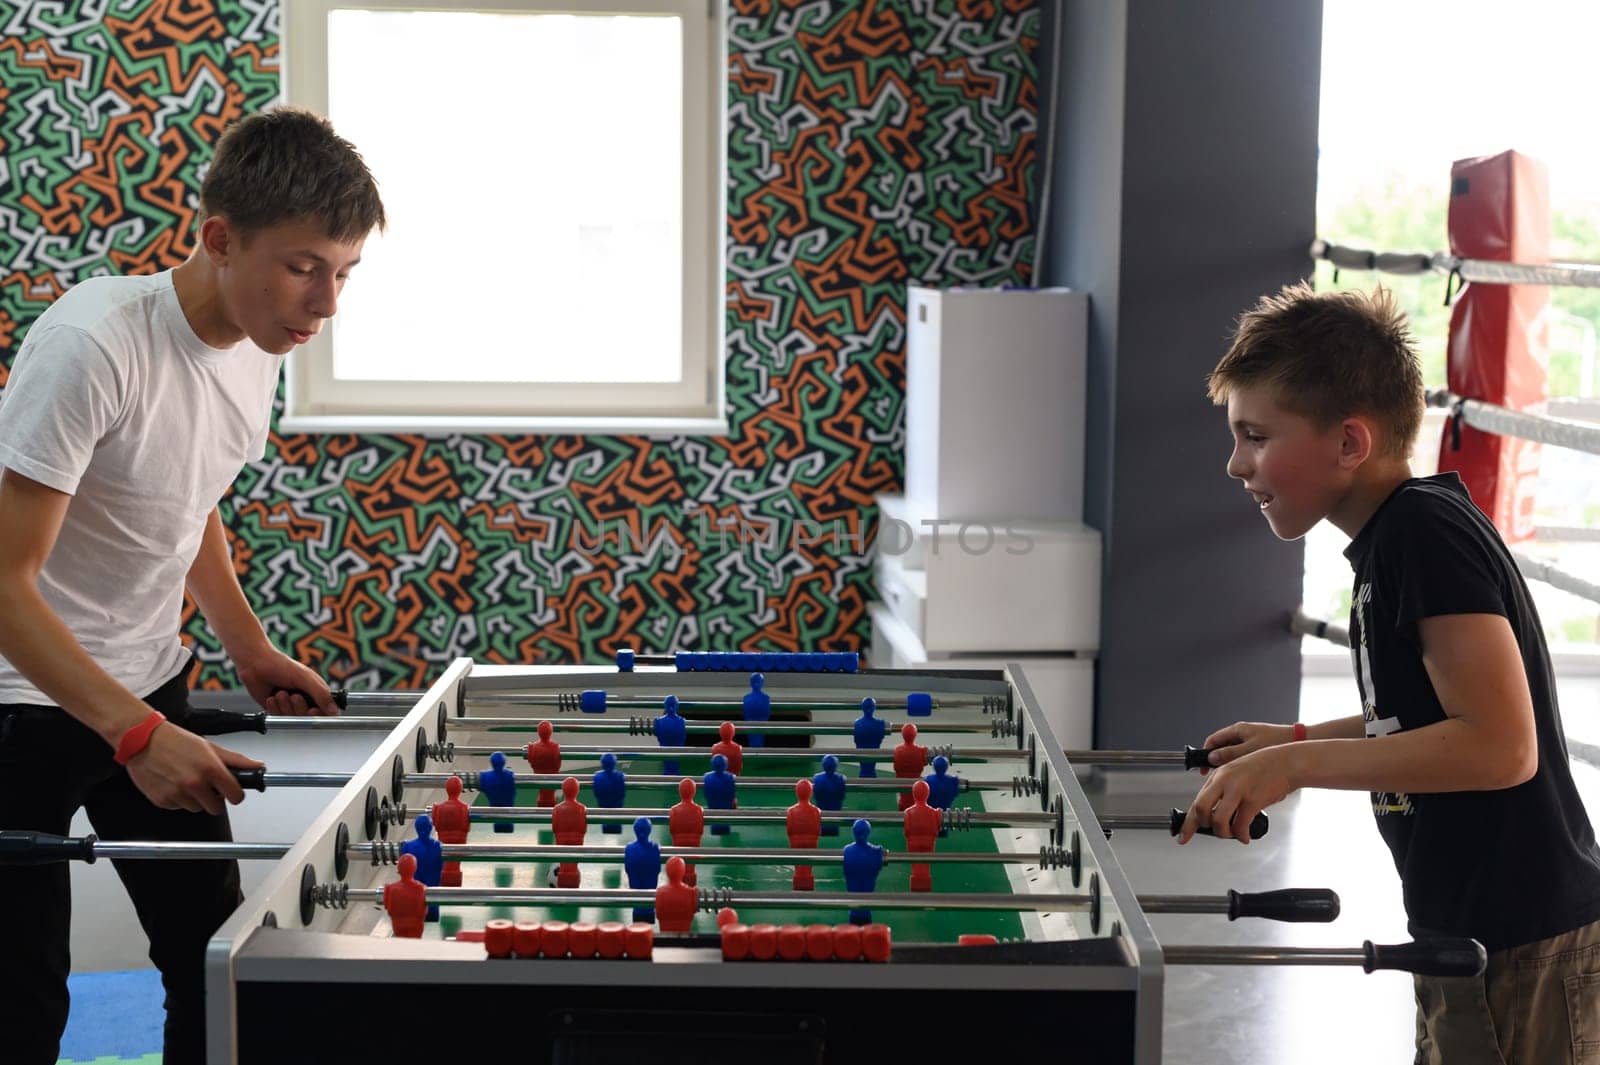 Active recreation in the game room, children play table football. by Niko_Cingaryuk